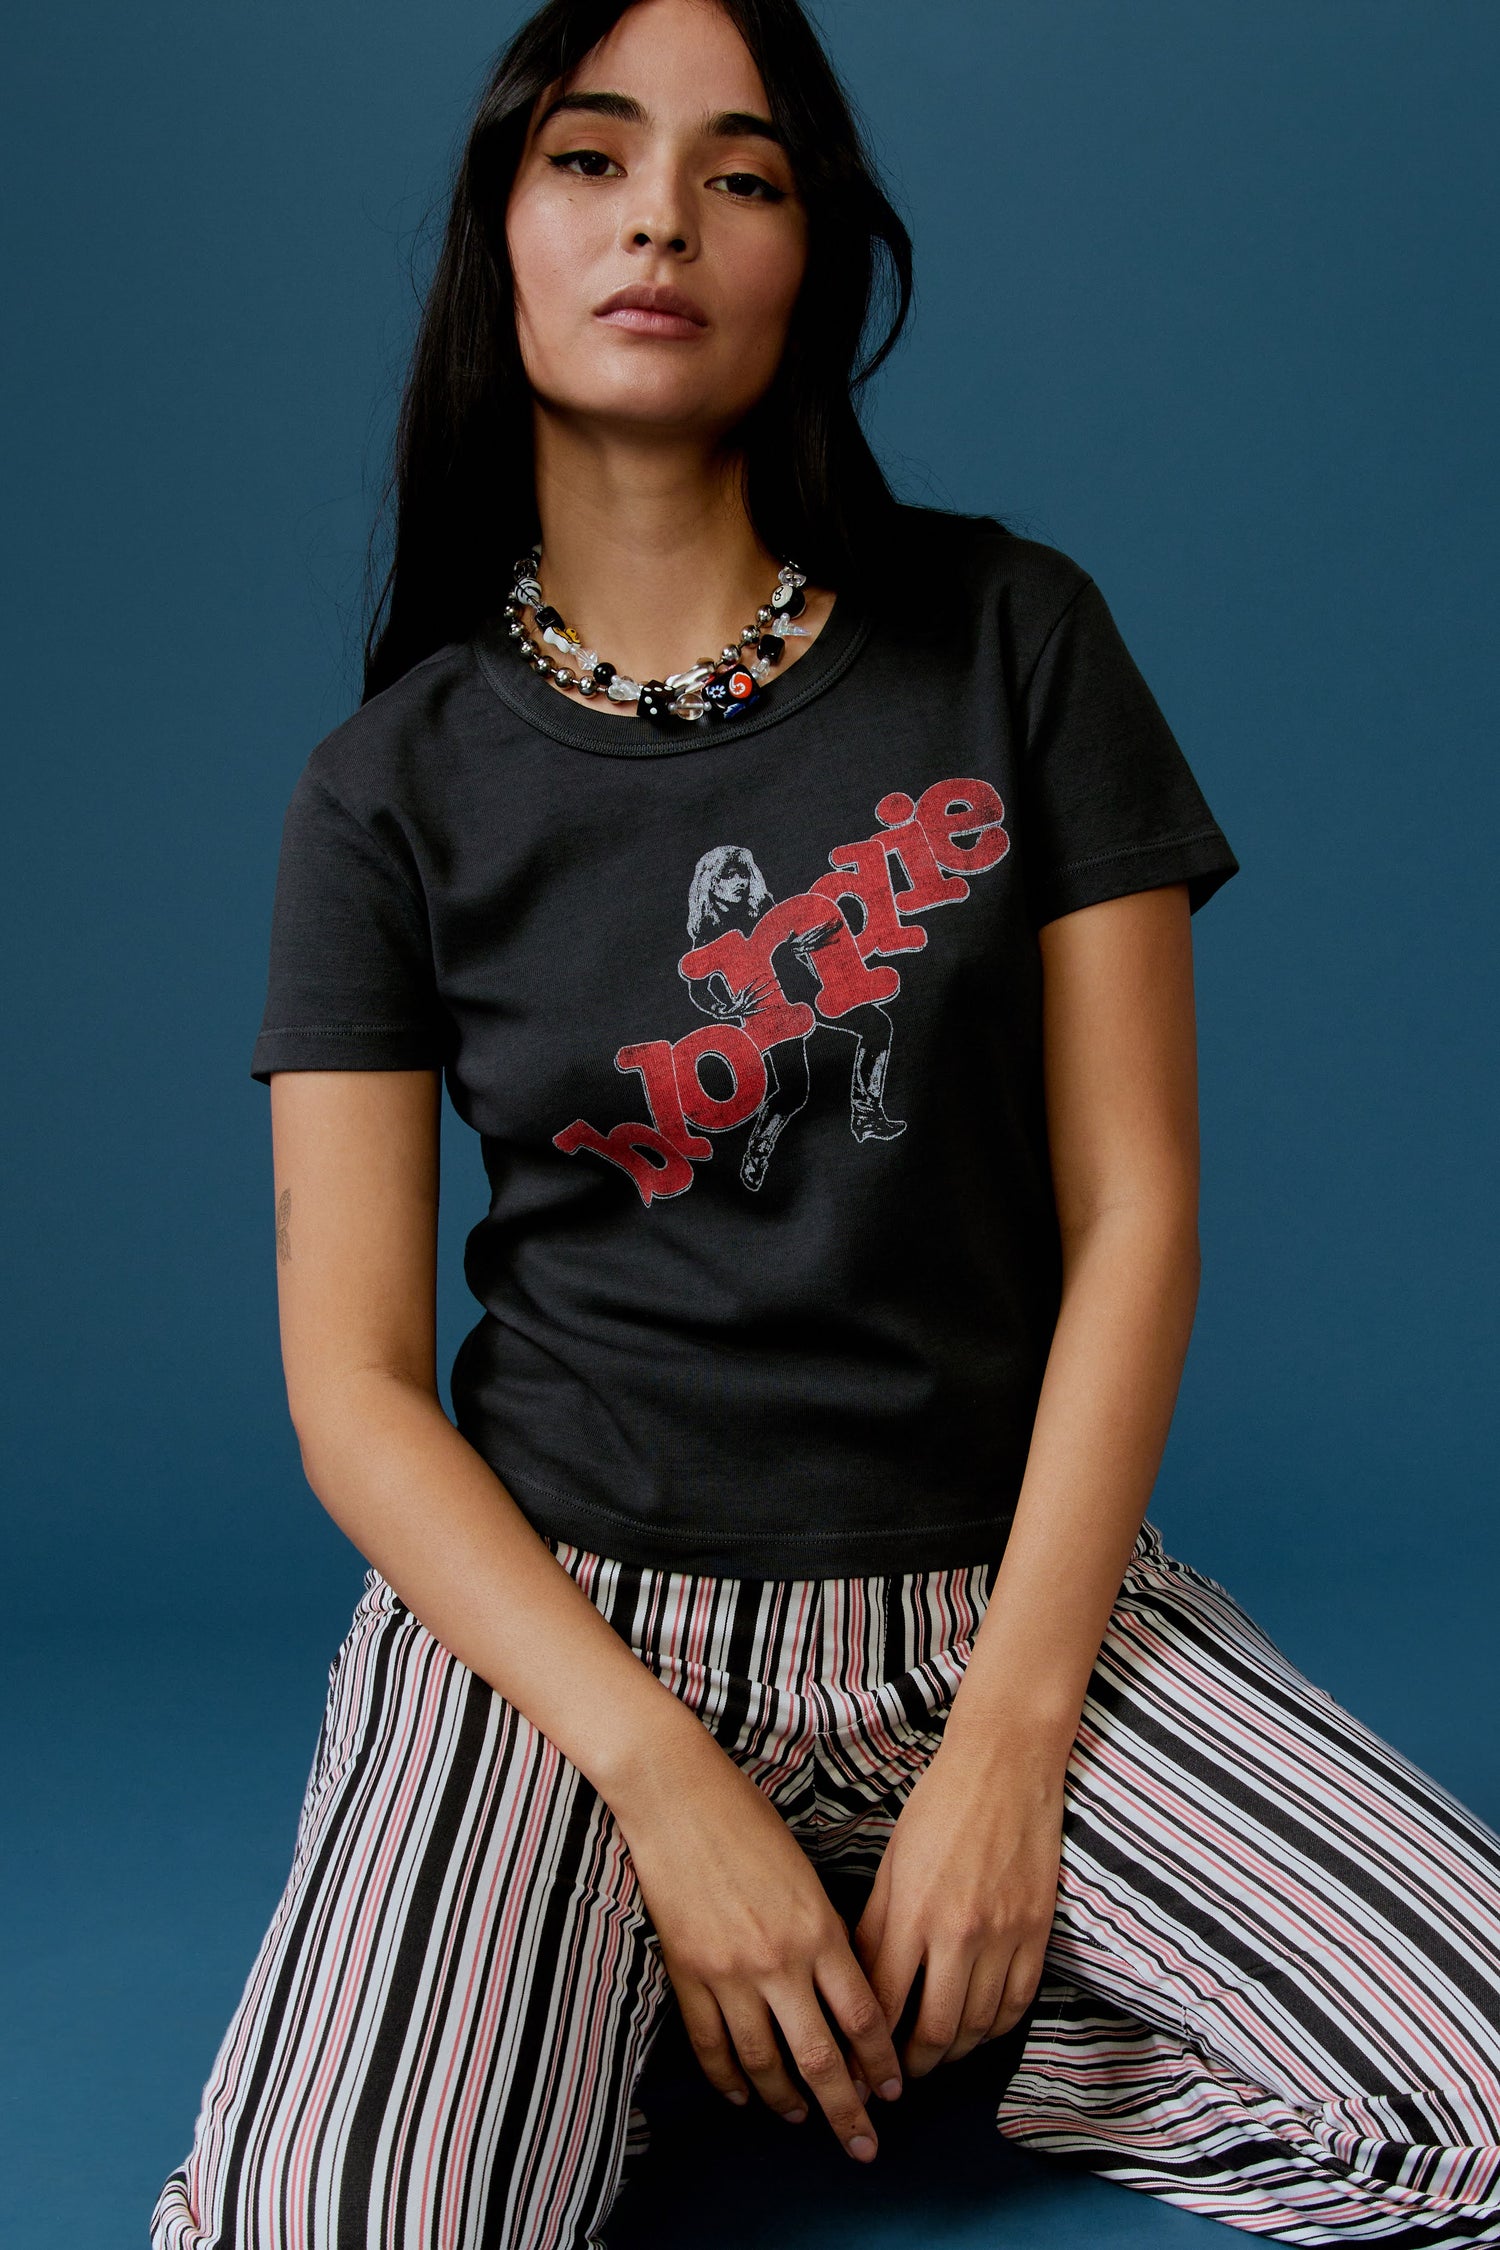 A dark-haired model featuring a black tee stamped with 'blondie' in red, scattered letters.